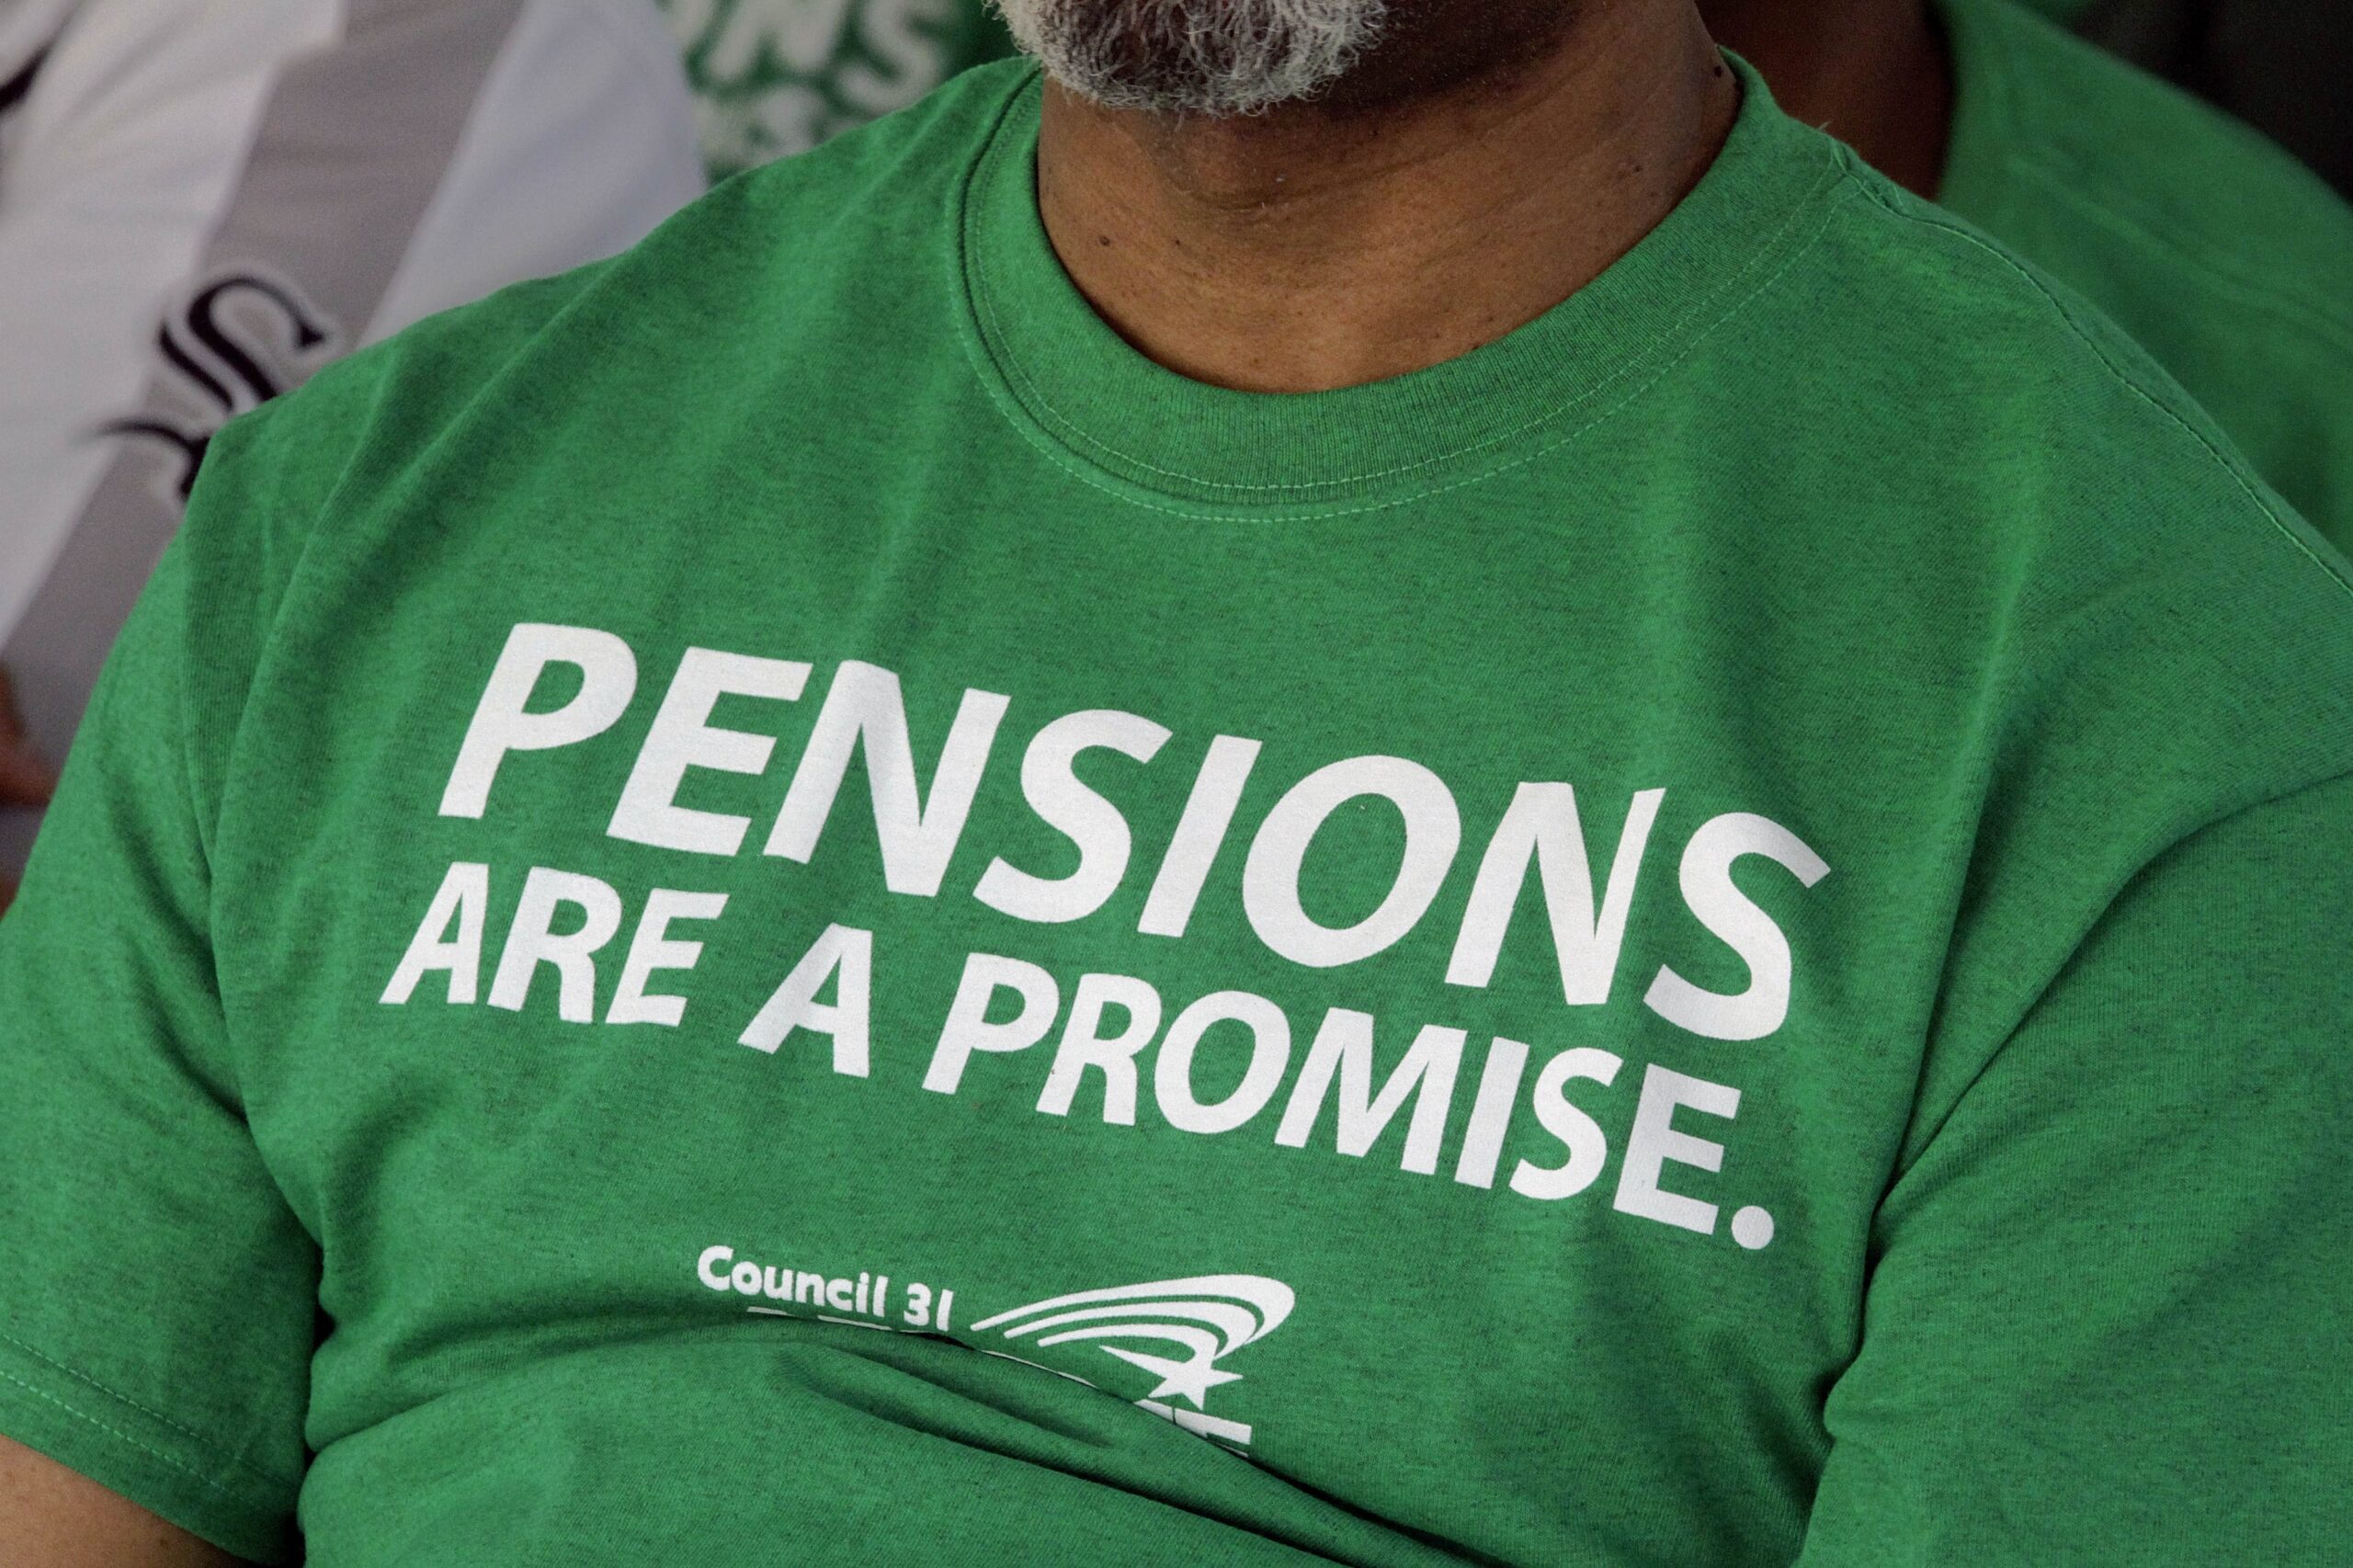 American Federation of State County and Municipal Employees union members wear a protest message on pensions